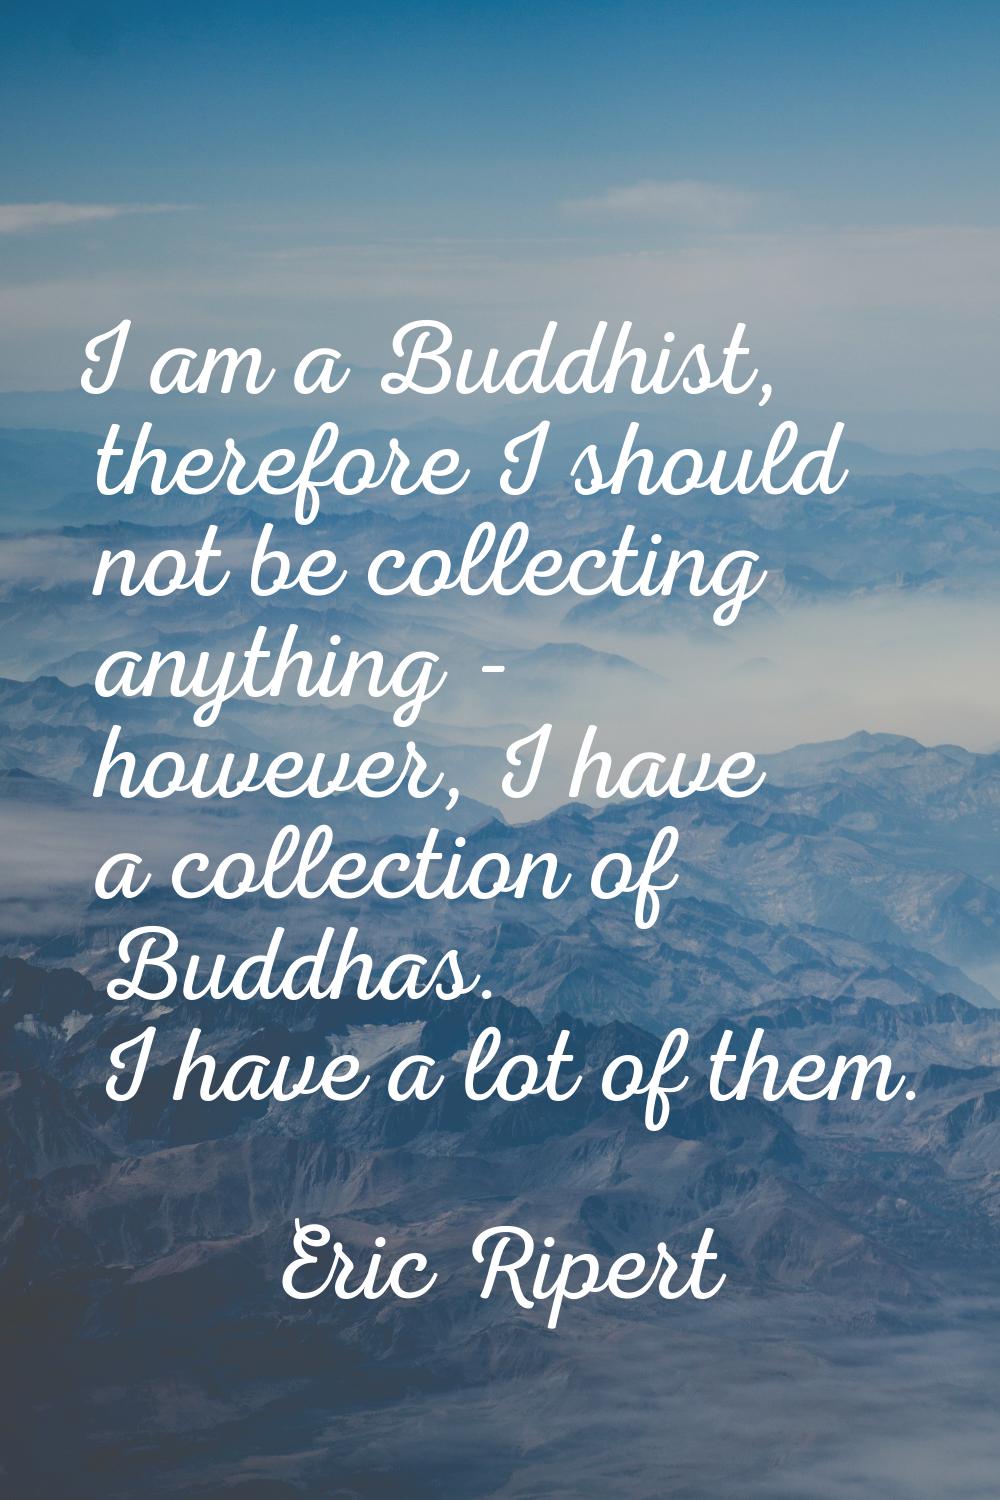 I am a Buddhist, therefore I should not be collecting anything - however, I have a collection of Bu